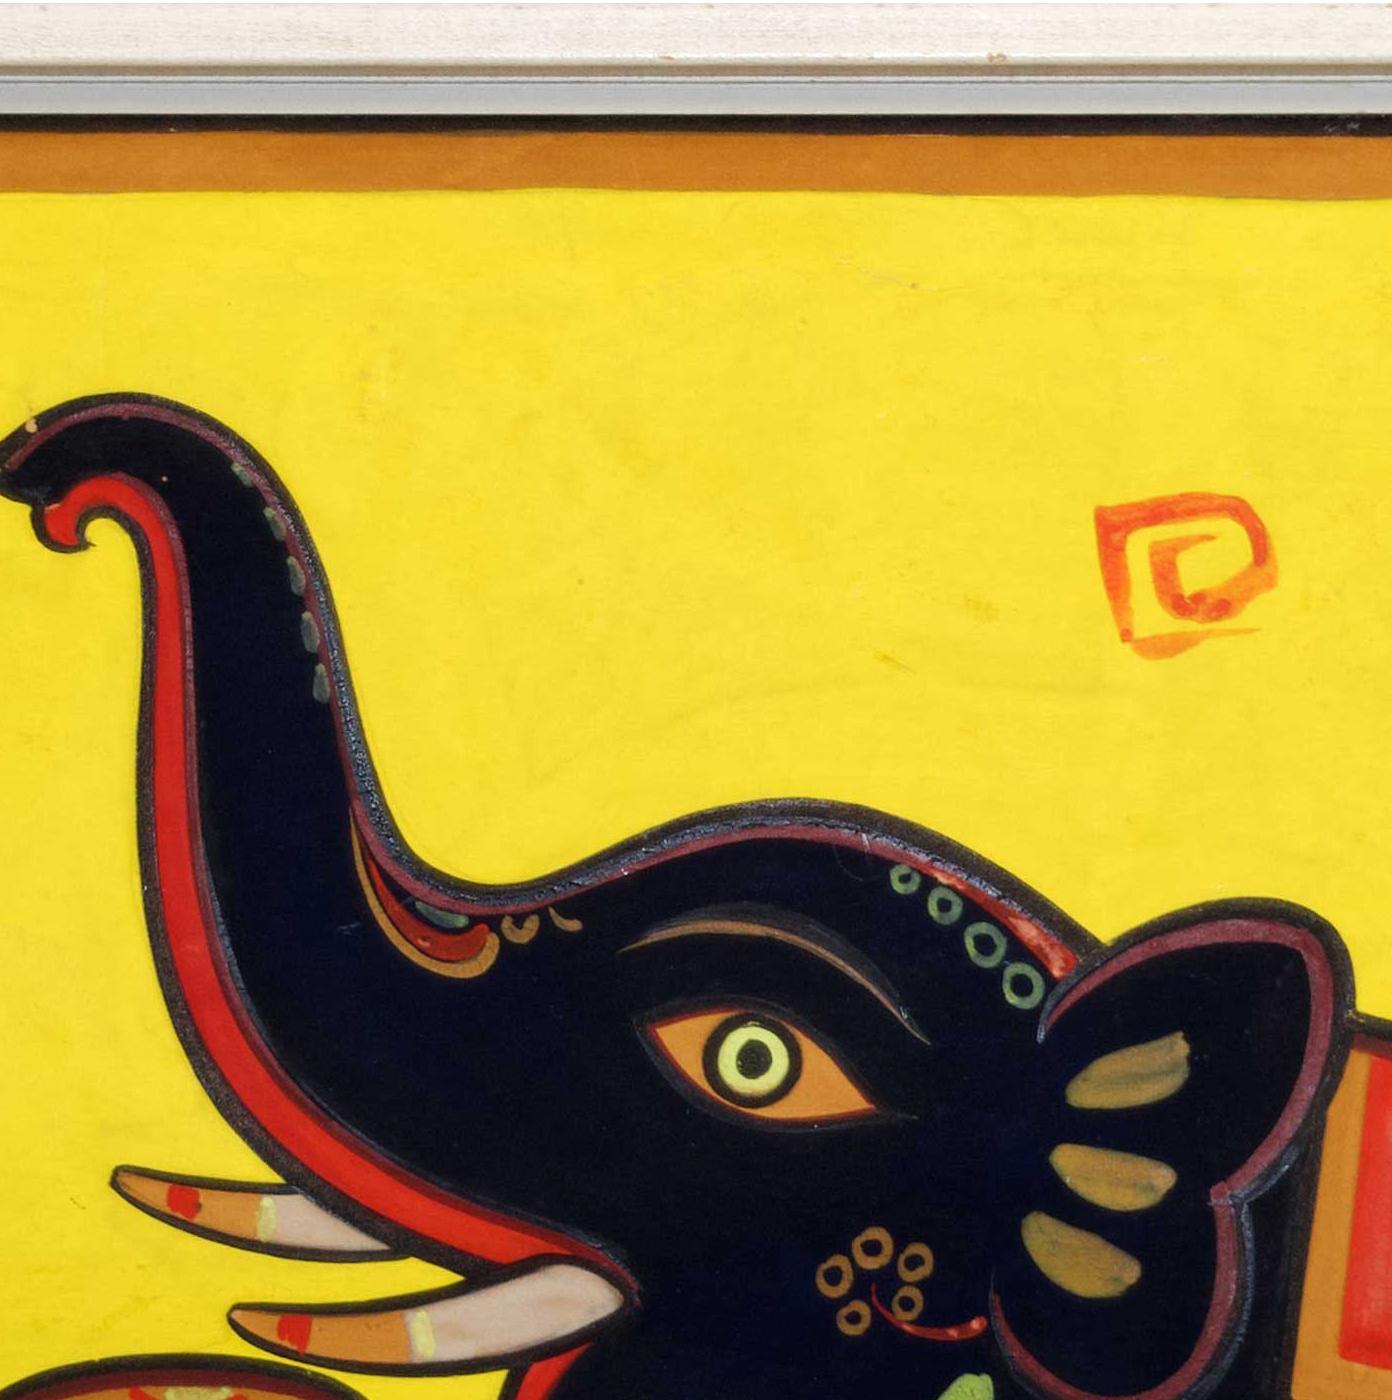 'Untitled (Elephants)' original painting on paper by Jamini Roy 2